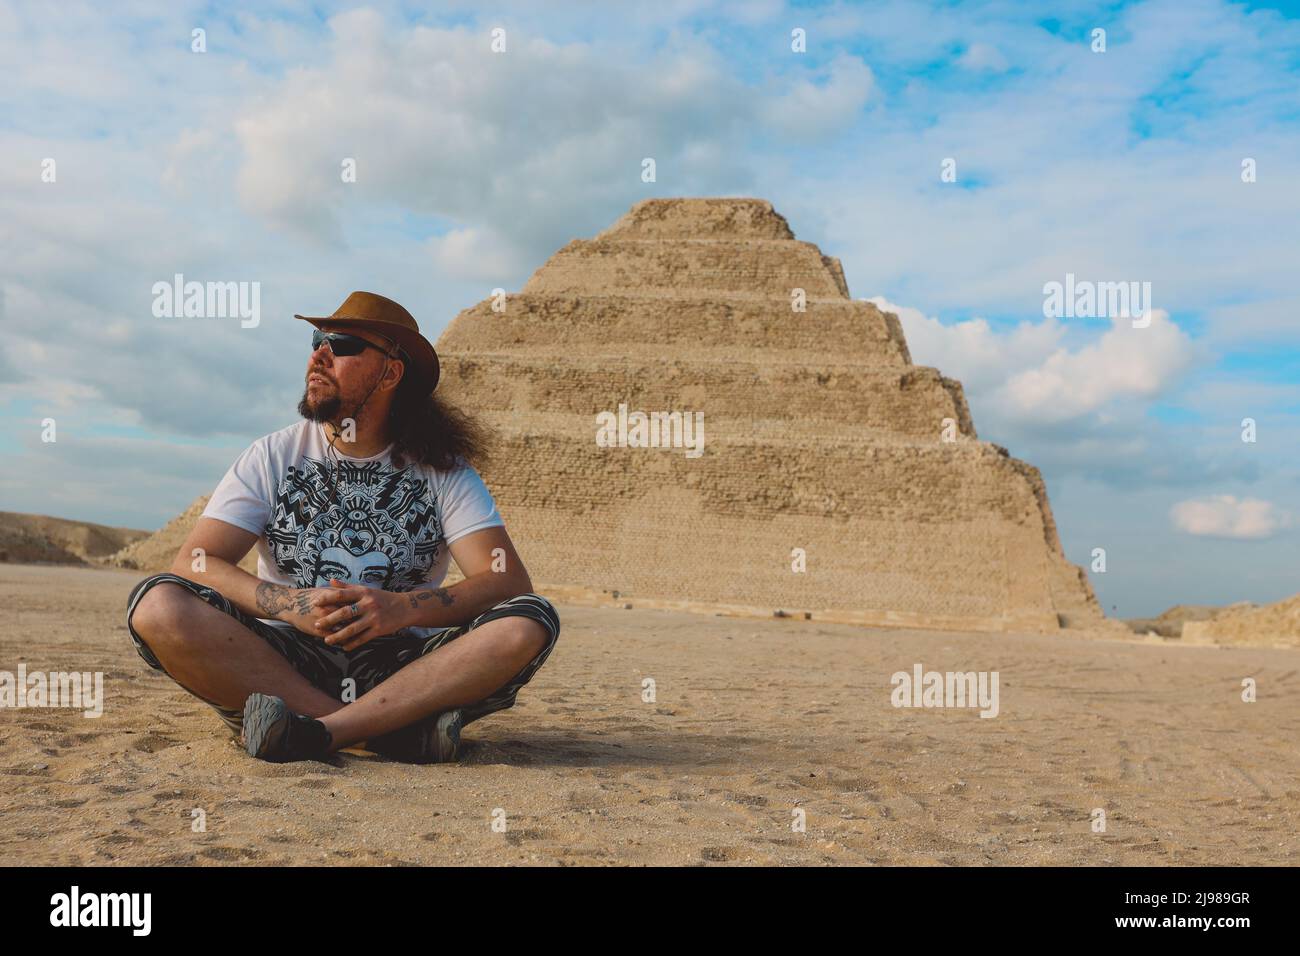 One Tourist Posing with the Step Pyramid of Djoser on the background in the Saqqara necropolis archaeological site, northwest of the city of Memphis Stock Photo